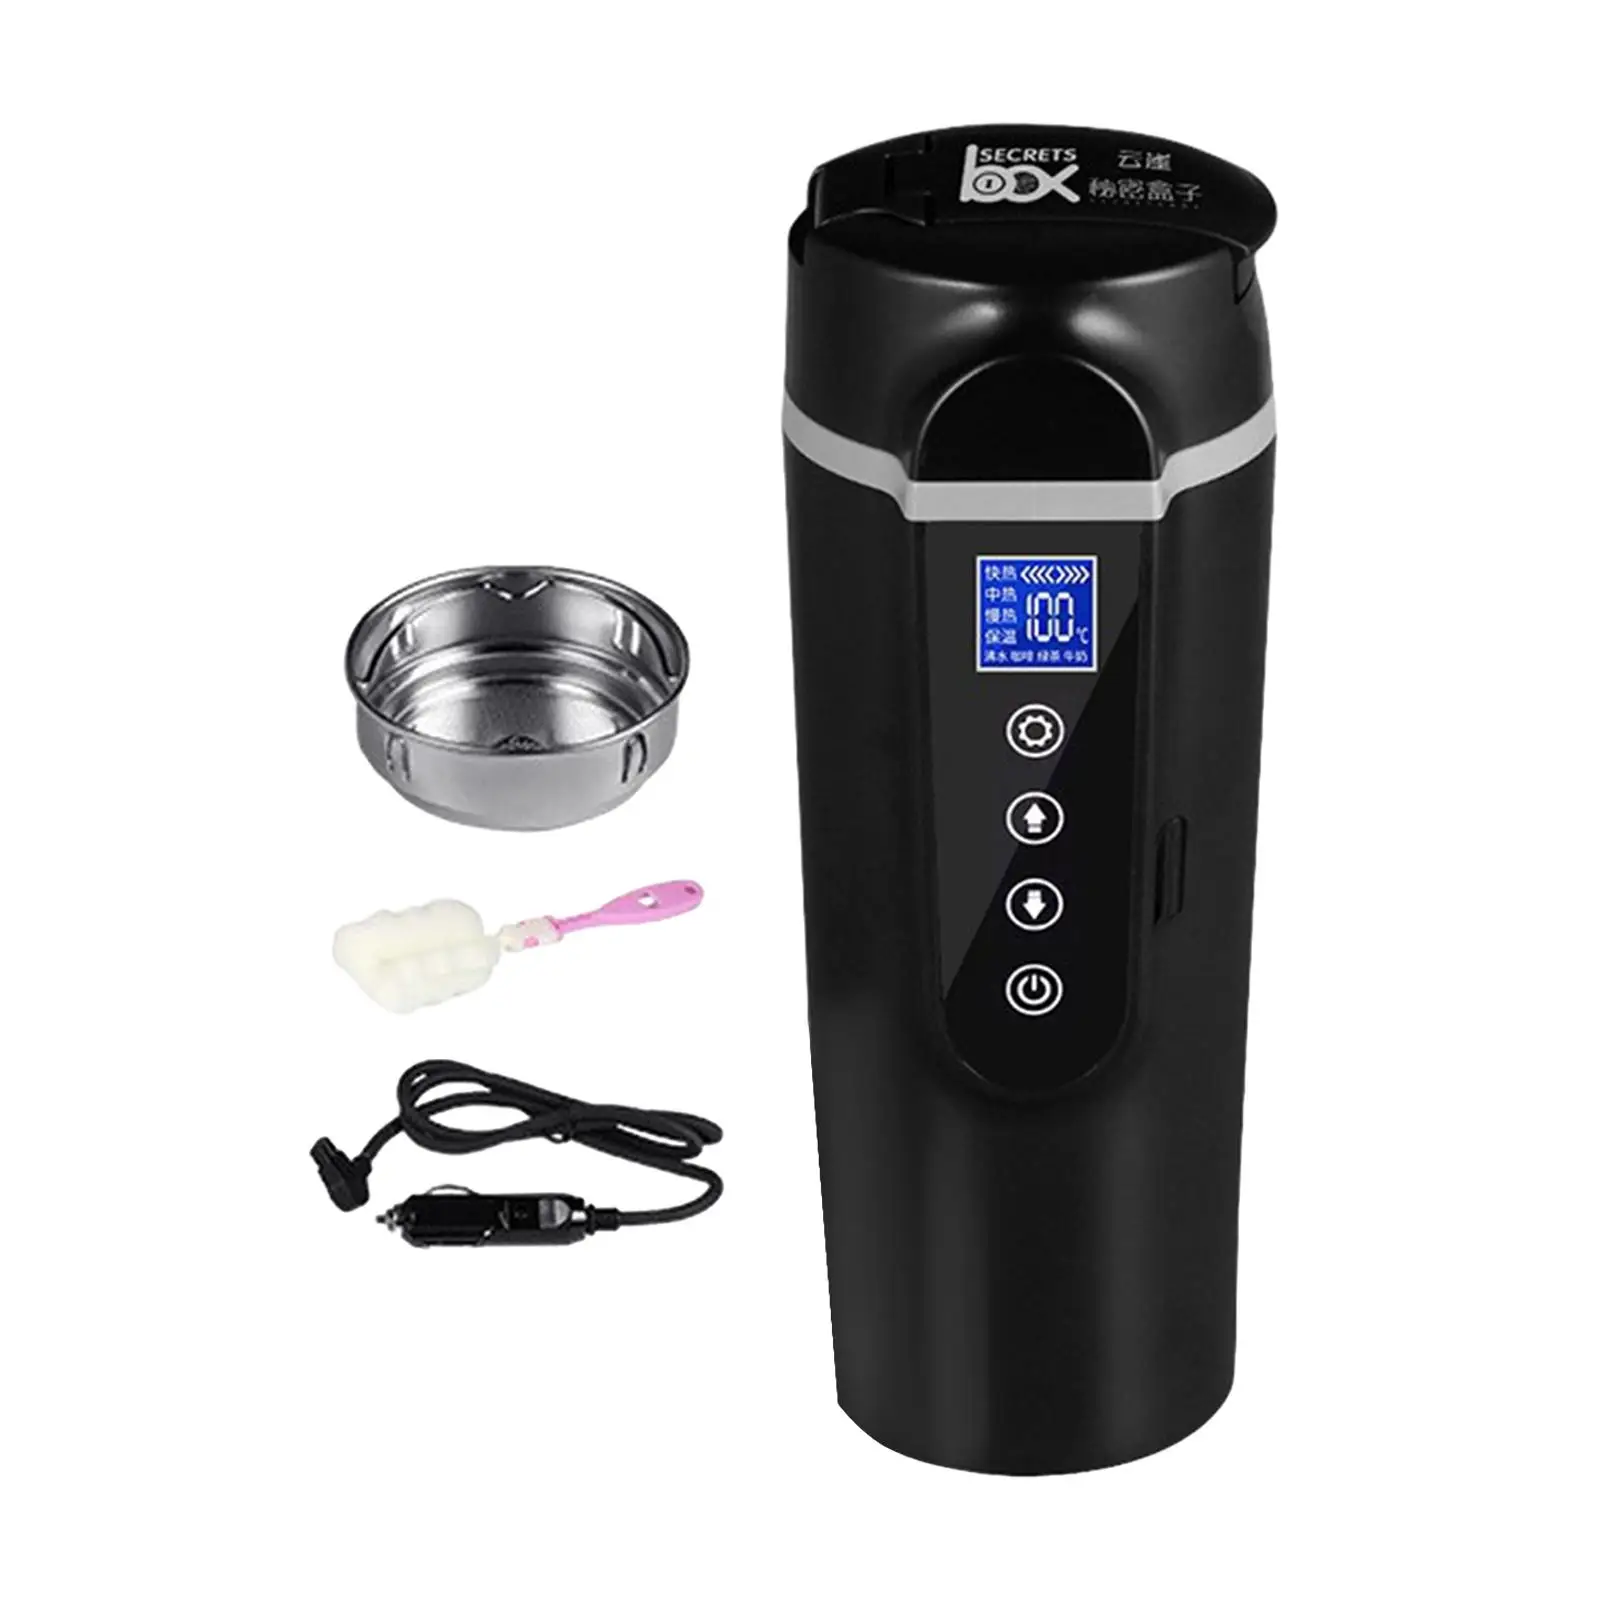 Car Heating Cup Portable Travel Coffee Mug for Auto Car Vehicles Drivers